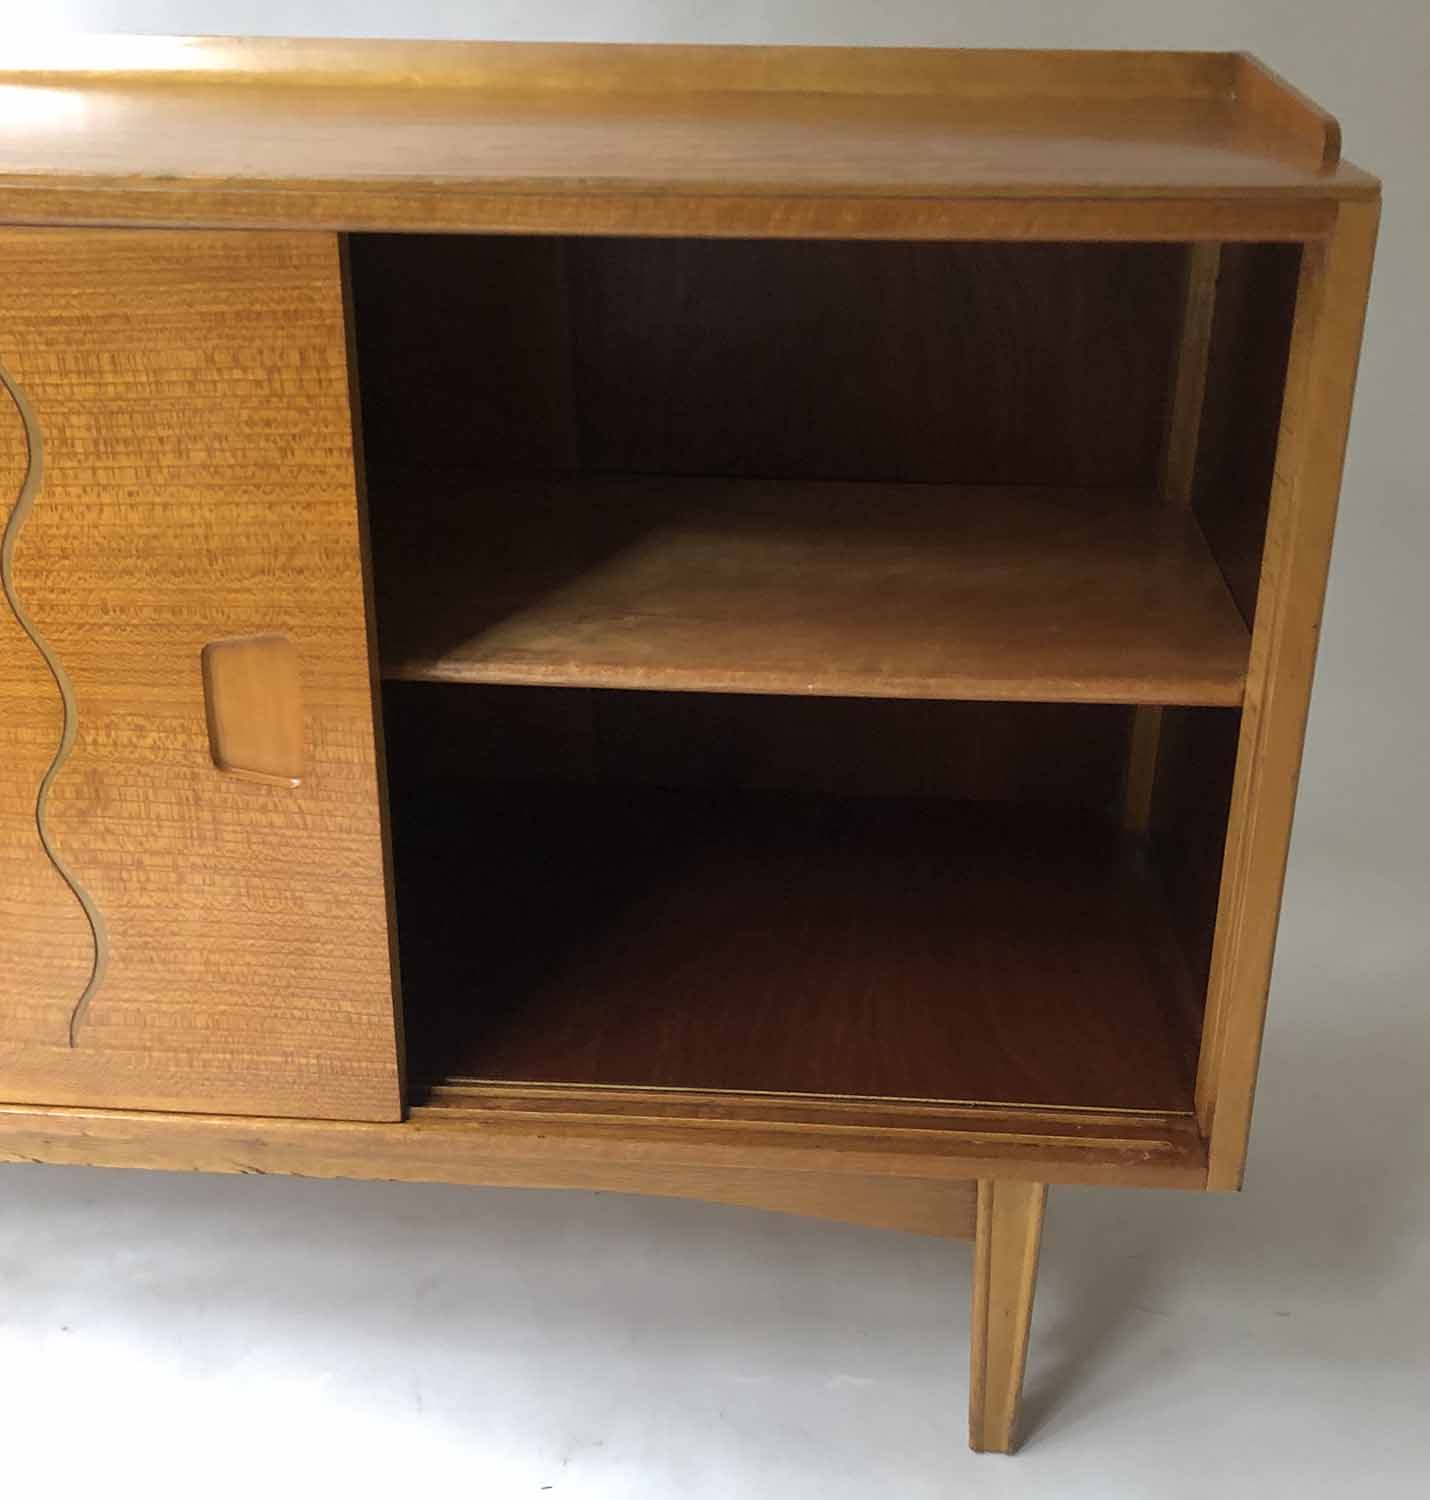 SIDEBOARD BY IAN AUDSLEY FOR G W EVANS, mid 20th century walnut and elm with sliding doors, - Image 5 of 6